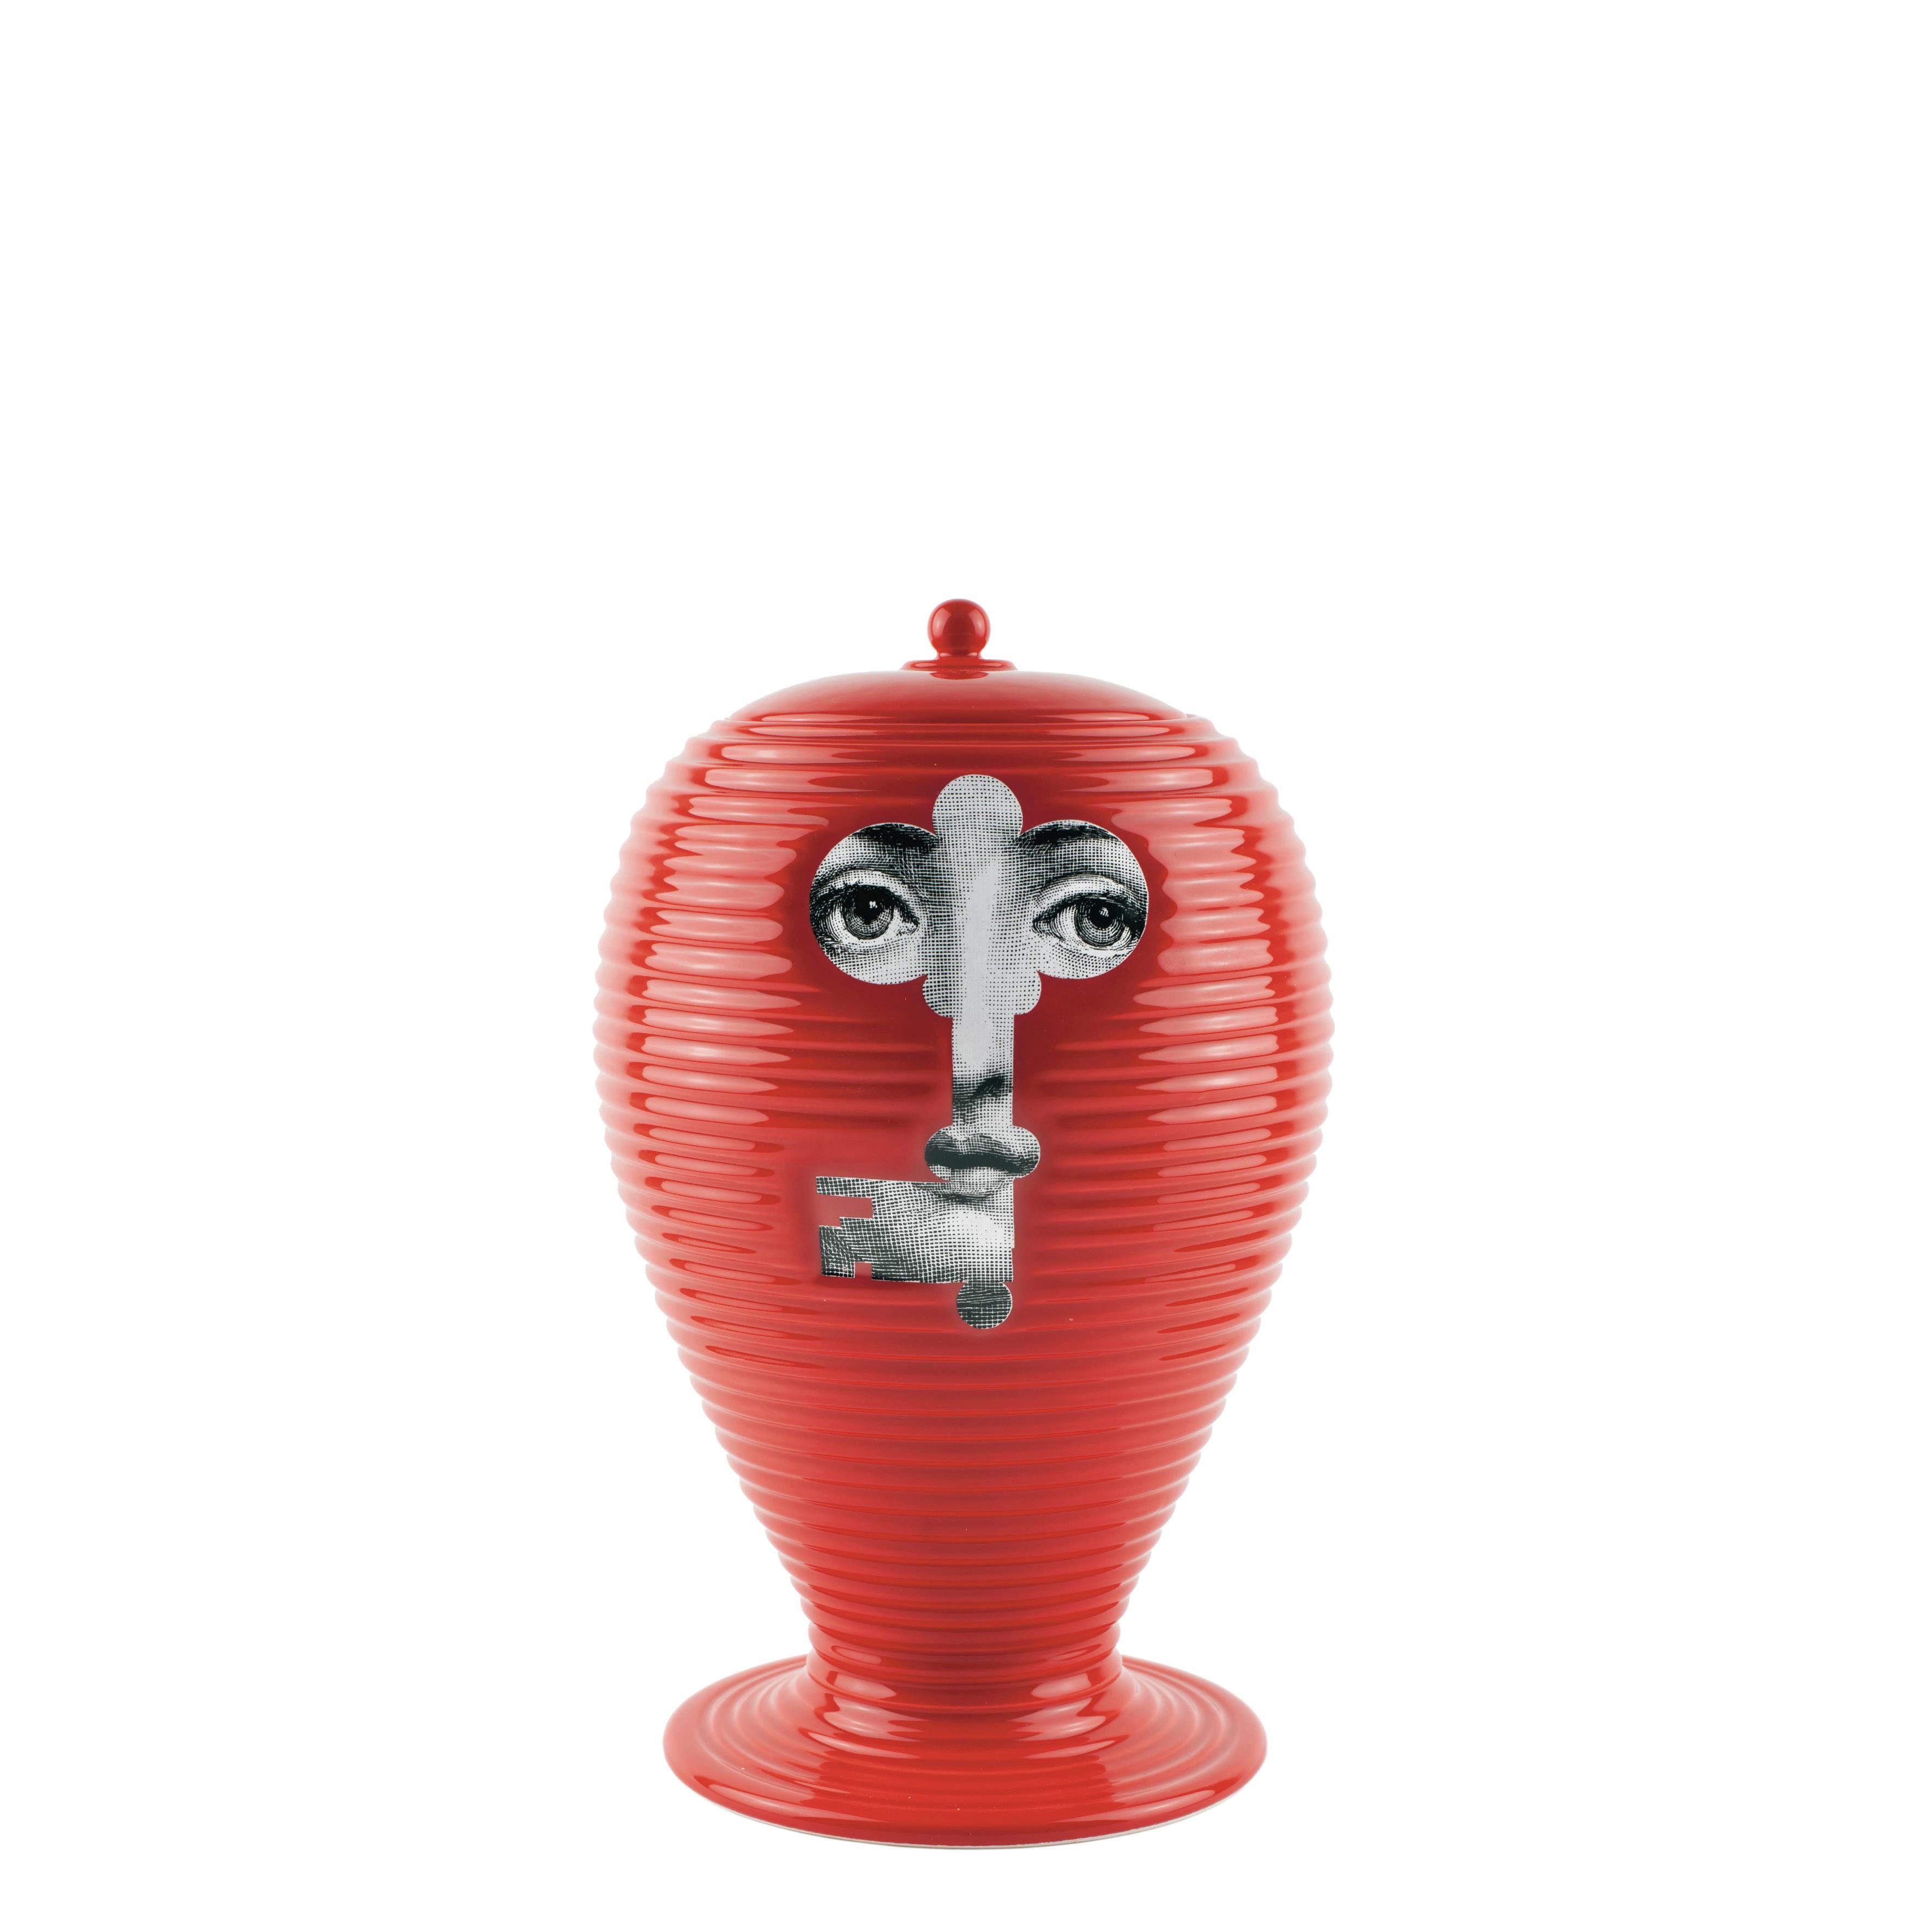 Another Classic of the Fornasetti catalogue, vases' uncommon shape mixed with the timeless beauty of Lina Cavalieri, Piero Fornasetti’s enduring muse, bring to life one of the most distinctive and original pieces from the Milanese Atelier.